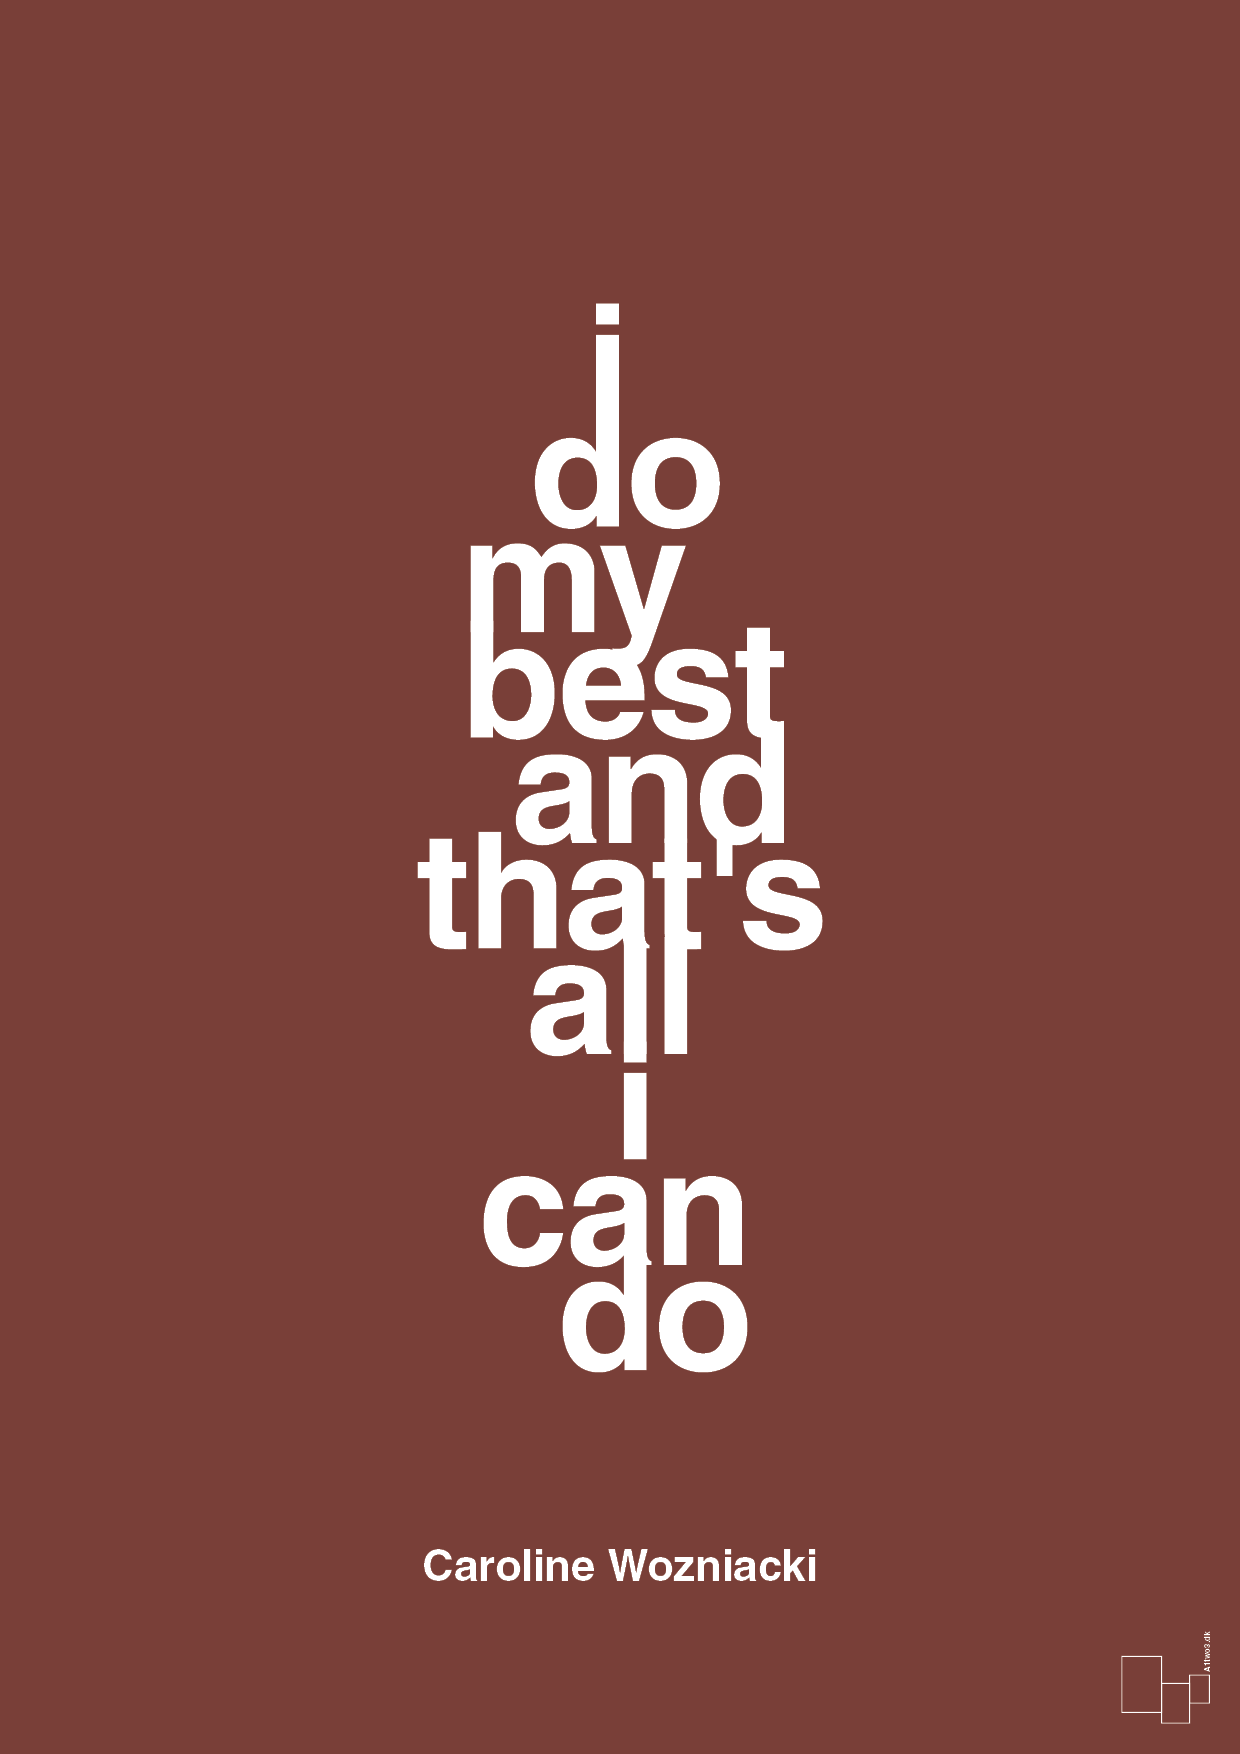 i do my best and that's all i can do - Plakat med Citater i Red Pepper